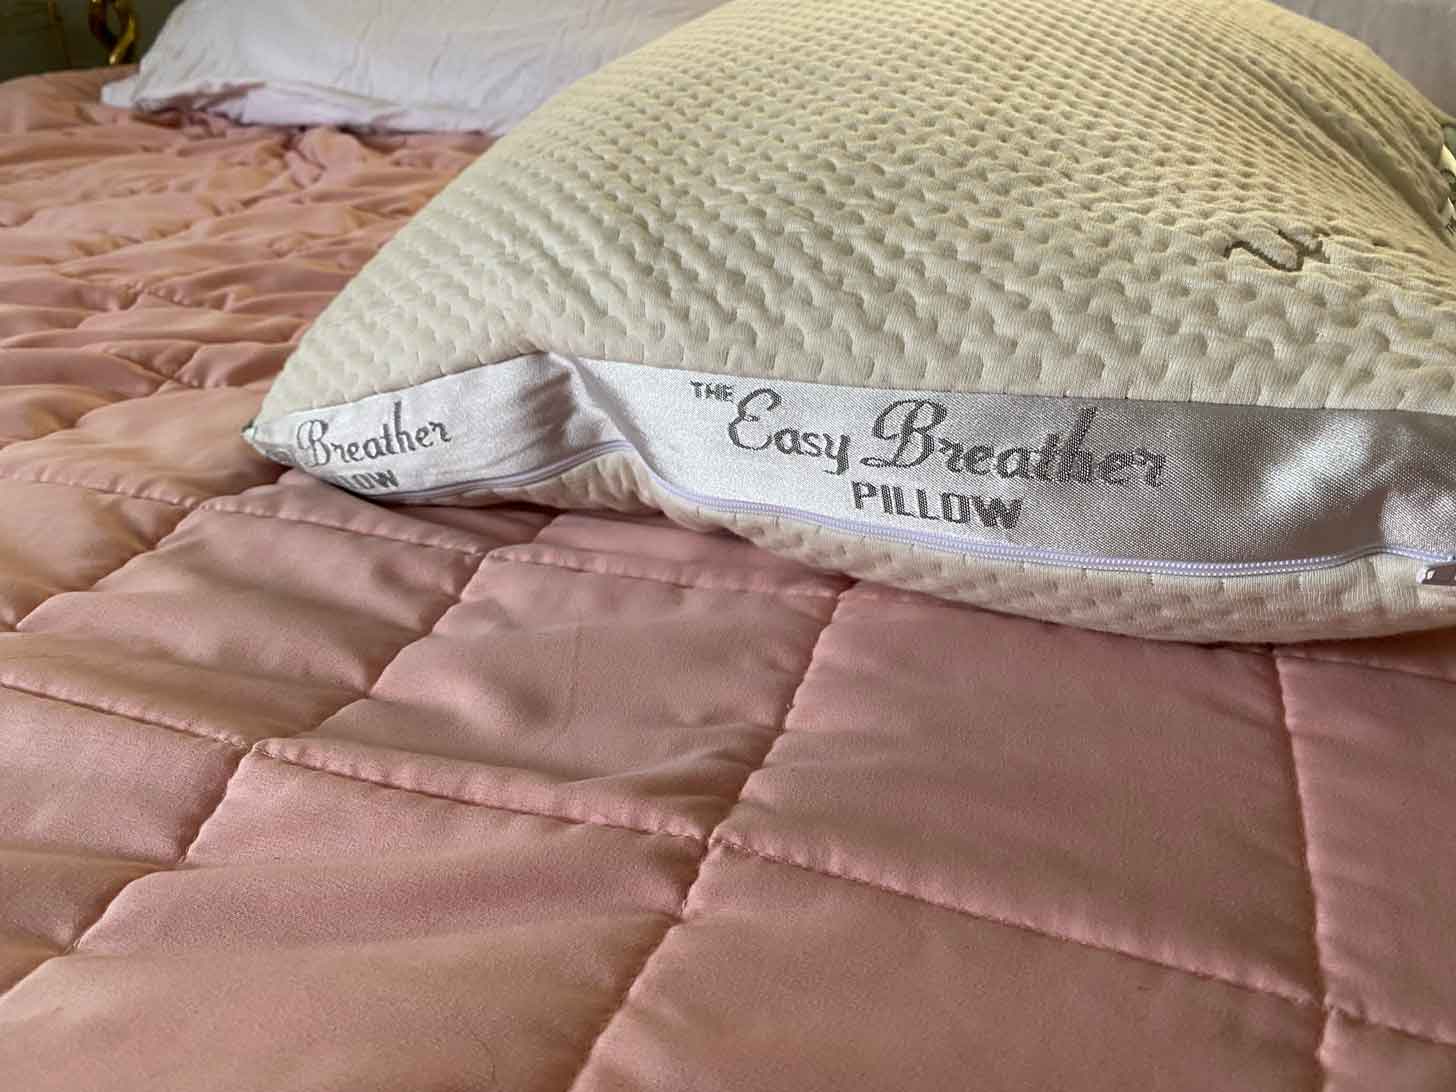 Pillow that says 'The Easy Breather Pillow'